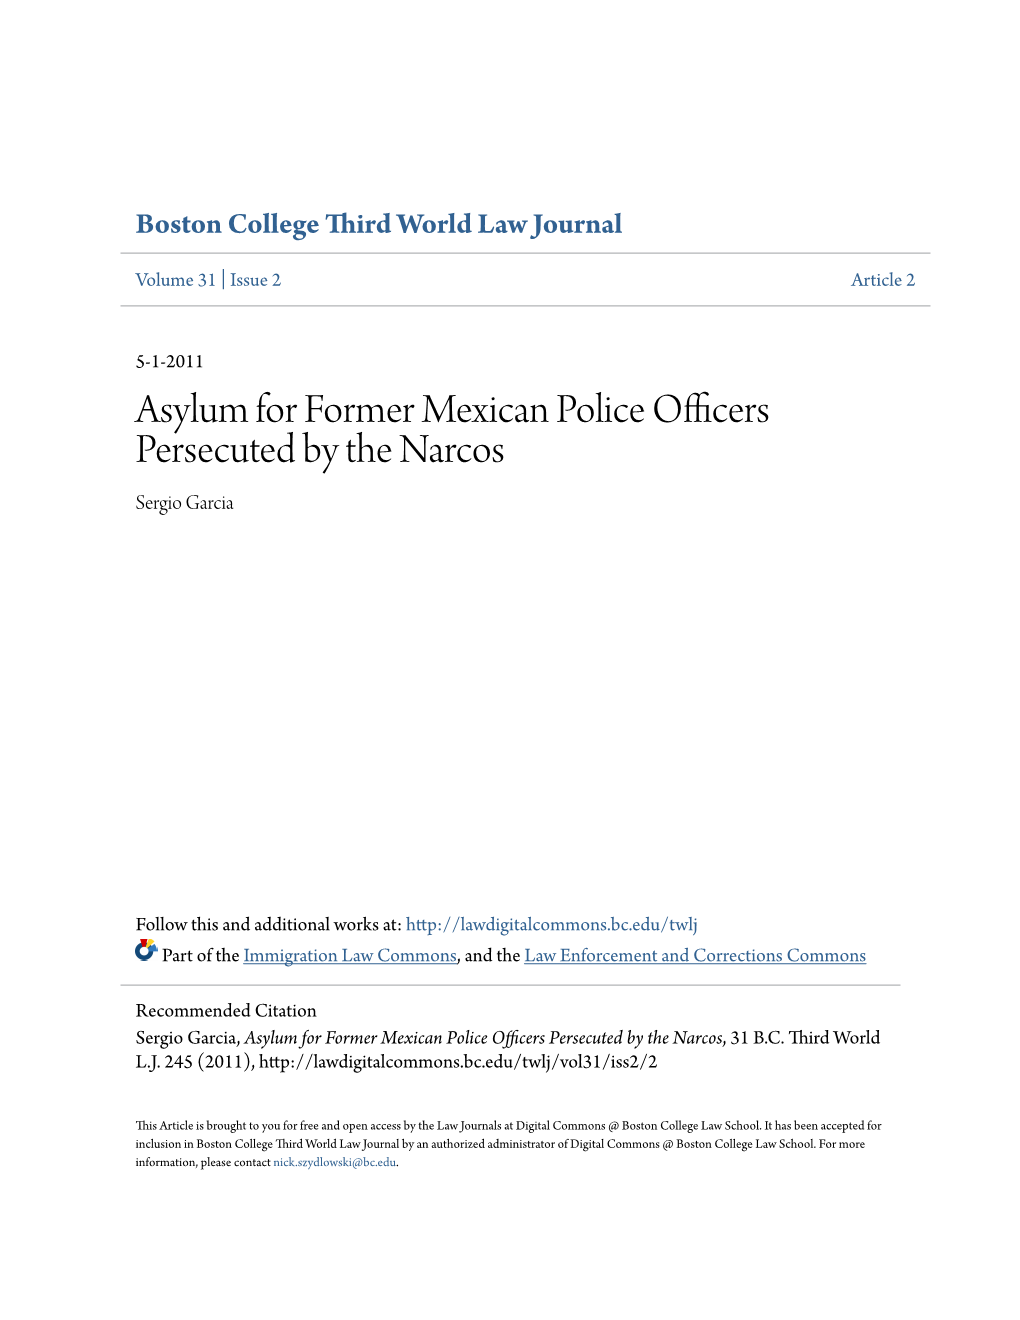 Asylum for Former Mexican Police Officers Persecuted by the Narcos Sergio Garcia